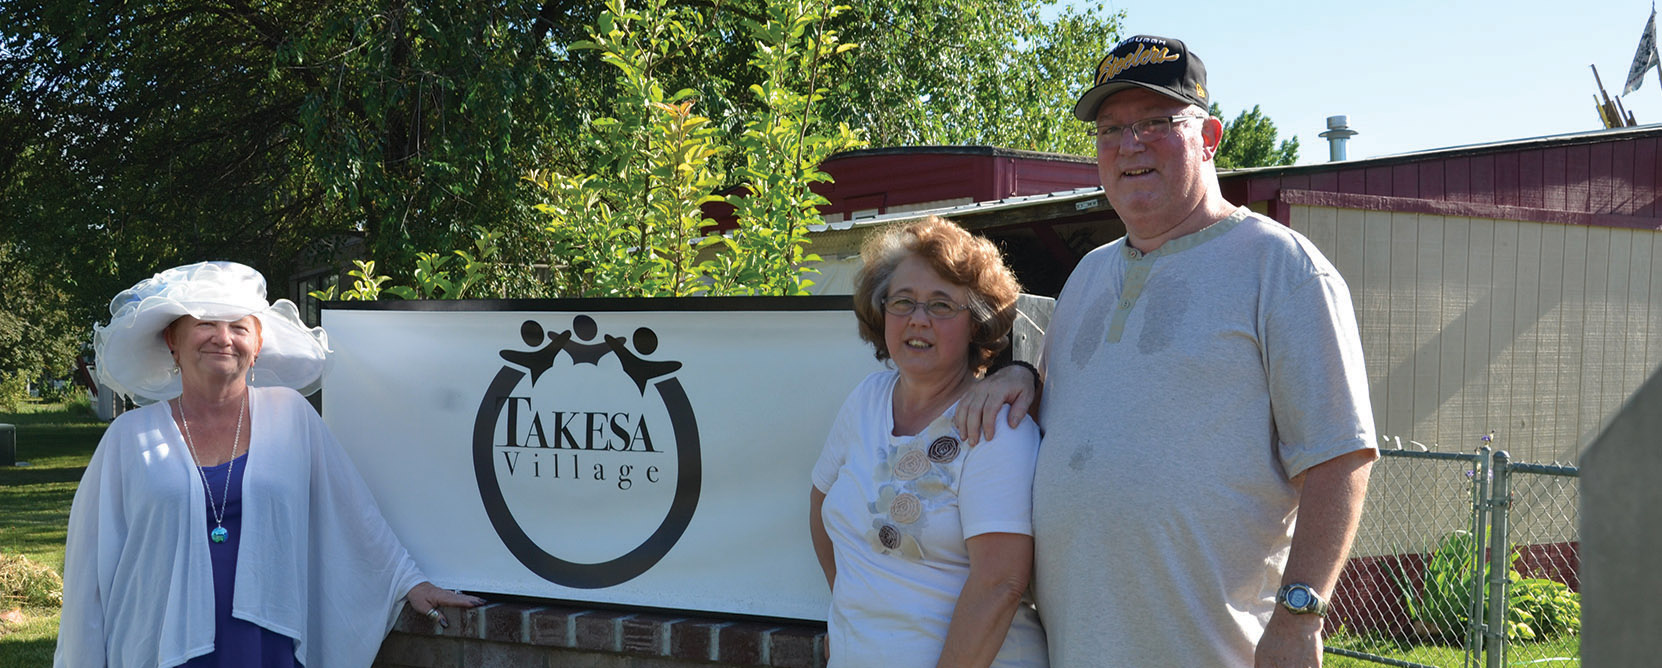 Residents pose in front of Takesa Village sign.